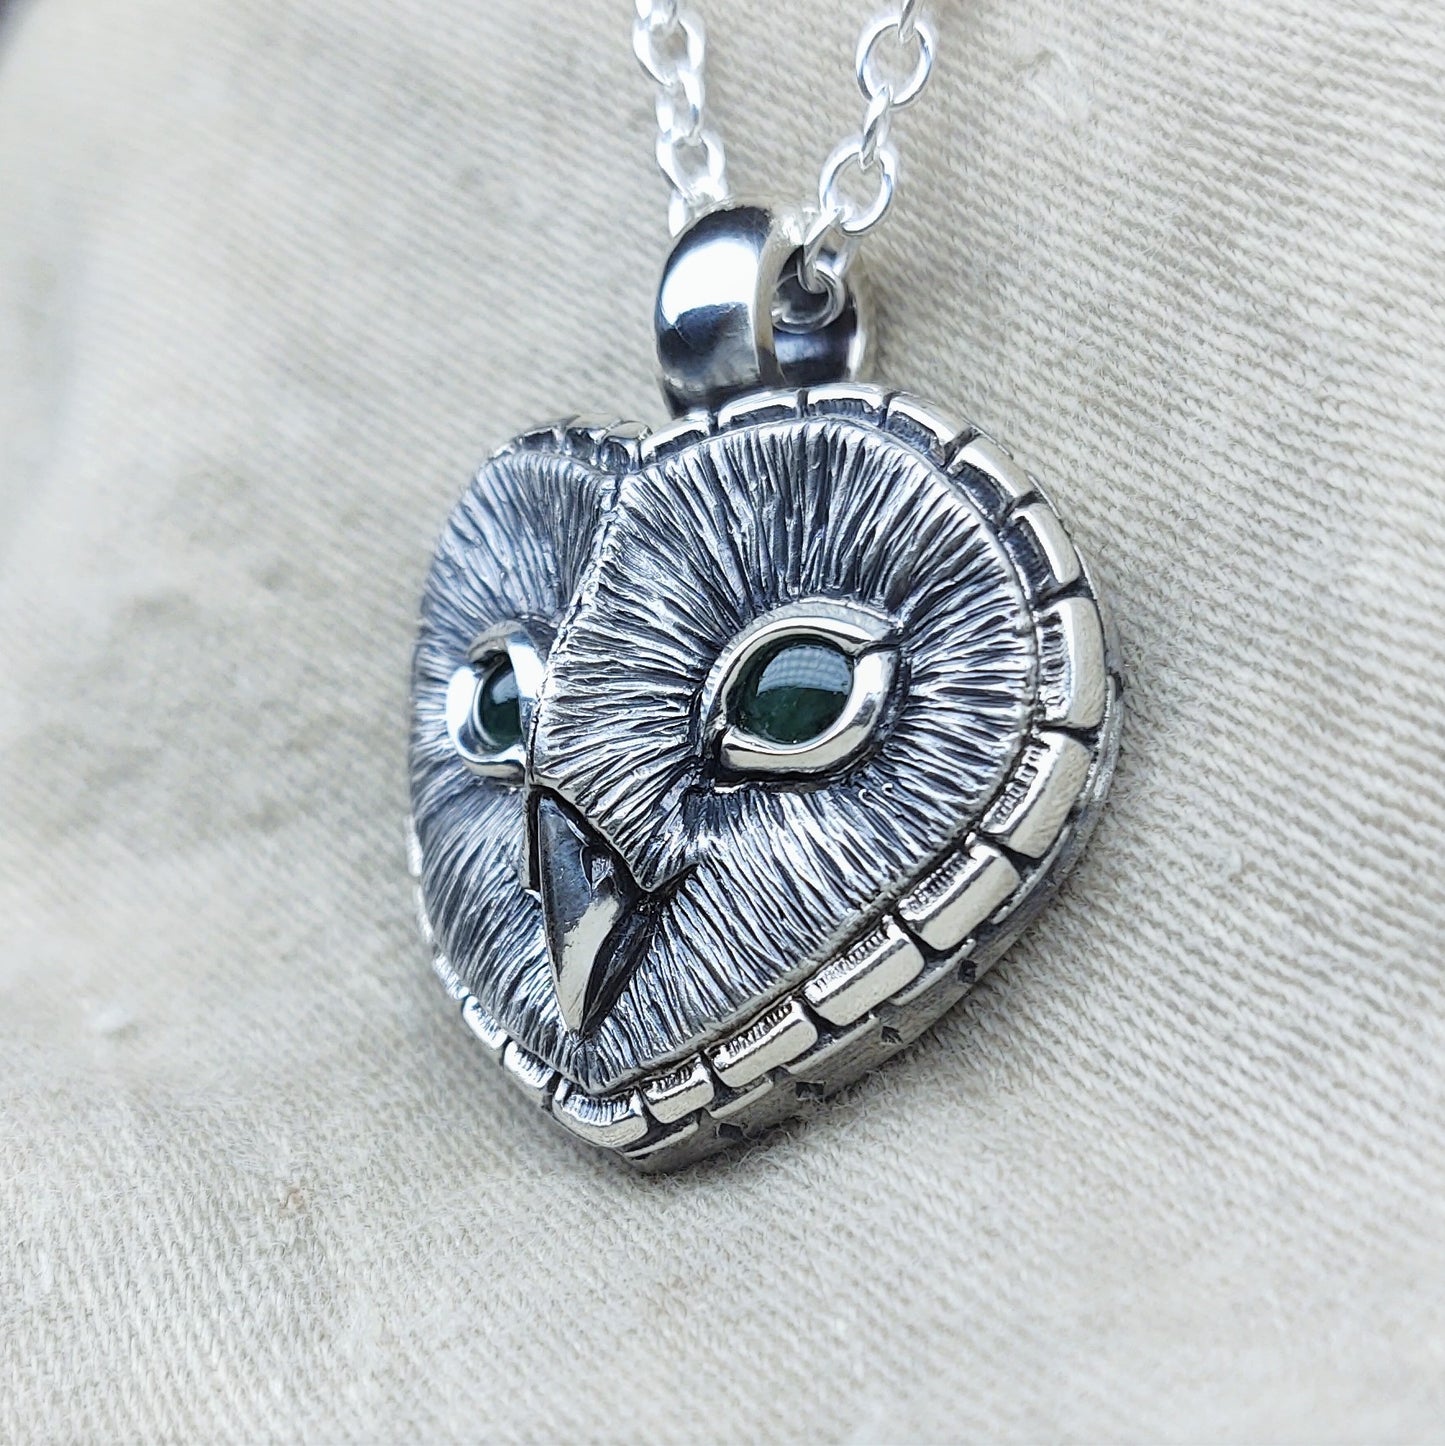 Emerald Barn Owl necklace, large sterling silver Barn Owl pendant with natural emerald eyes.  *This piece is finished and ready to be shipped* © Adrian Ashley